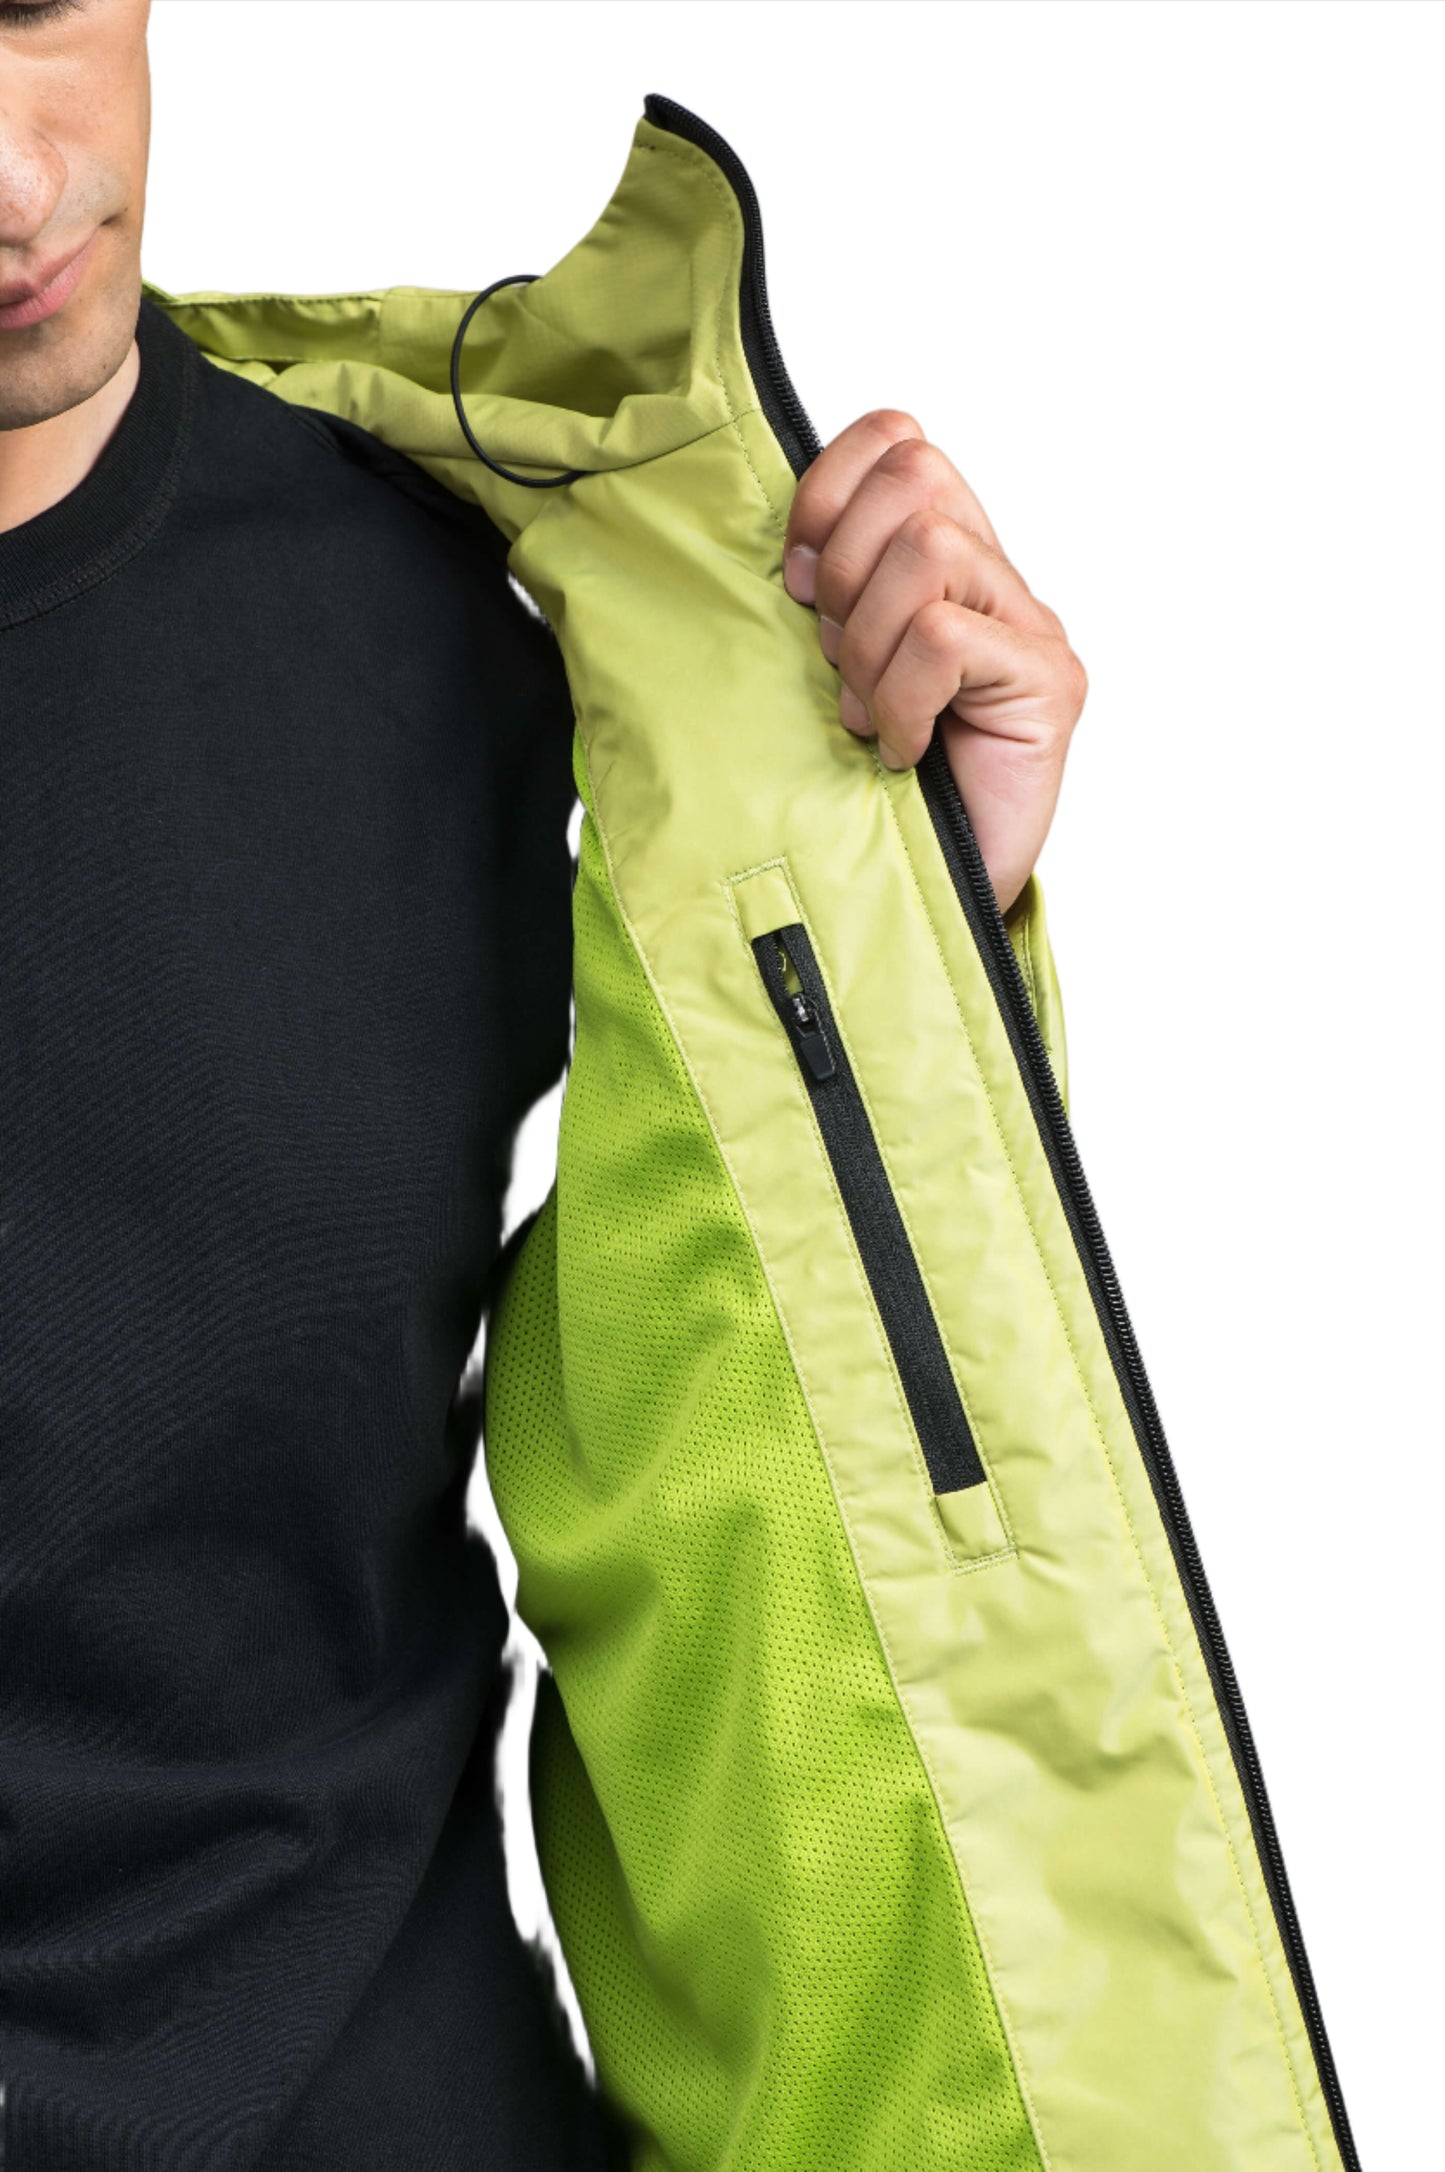 Mission Men's Performance Rain Shell Jacket in hip length, non-removable hood with adjustable toggle, two-way waterproof zipper, flap closure waist pockets with additional side entry storage, zipper ventilation on back, passive underarm ventilation, and breathable mesh lining, in Sulphur Spring